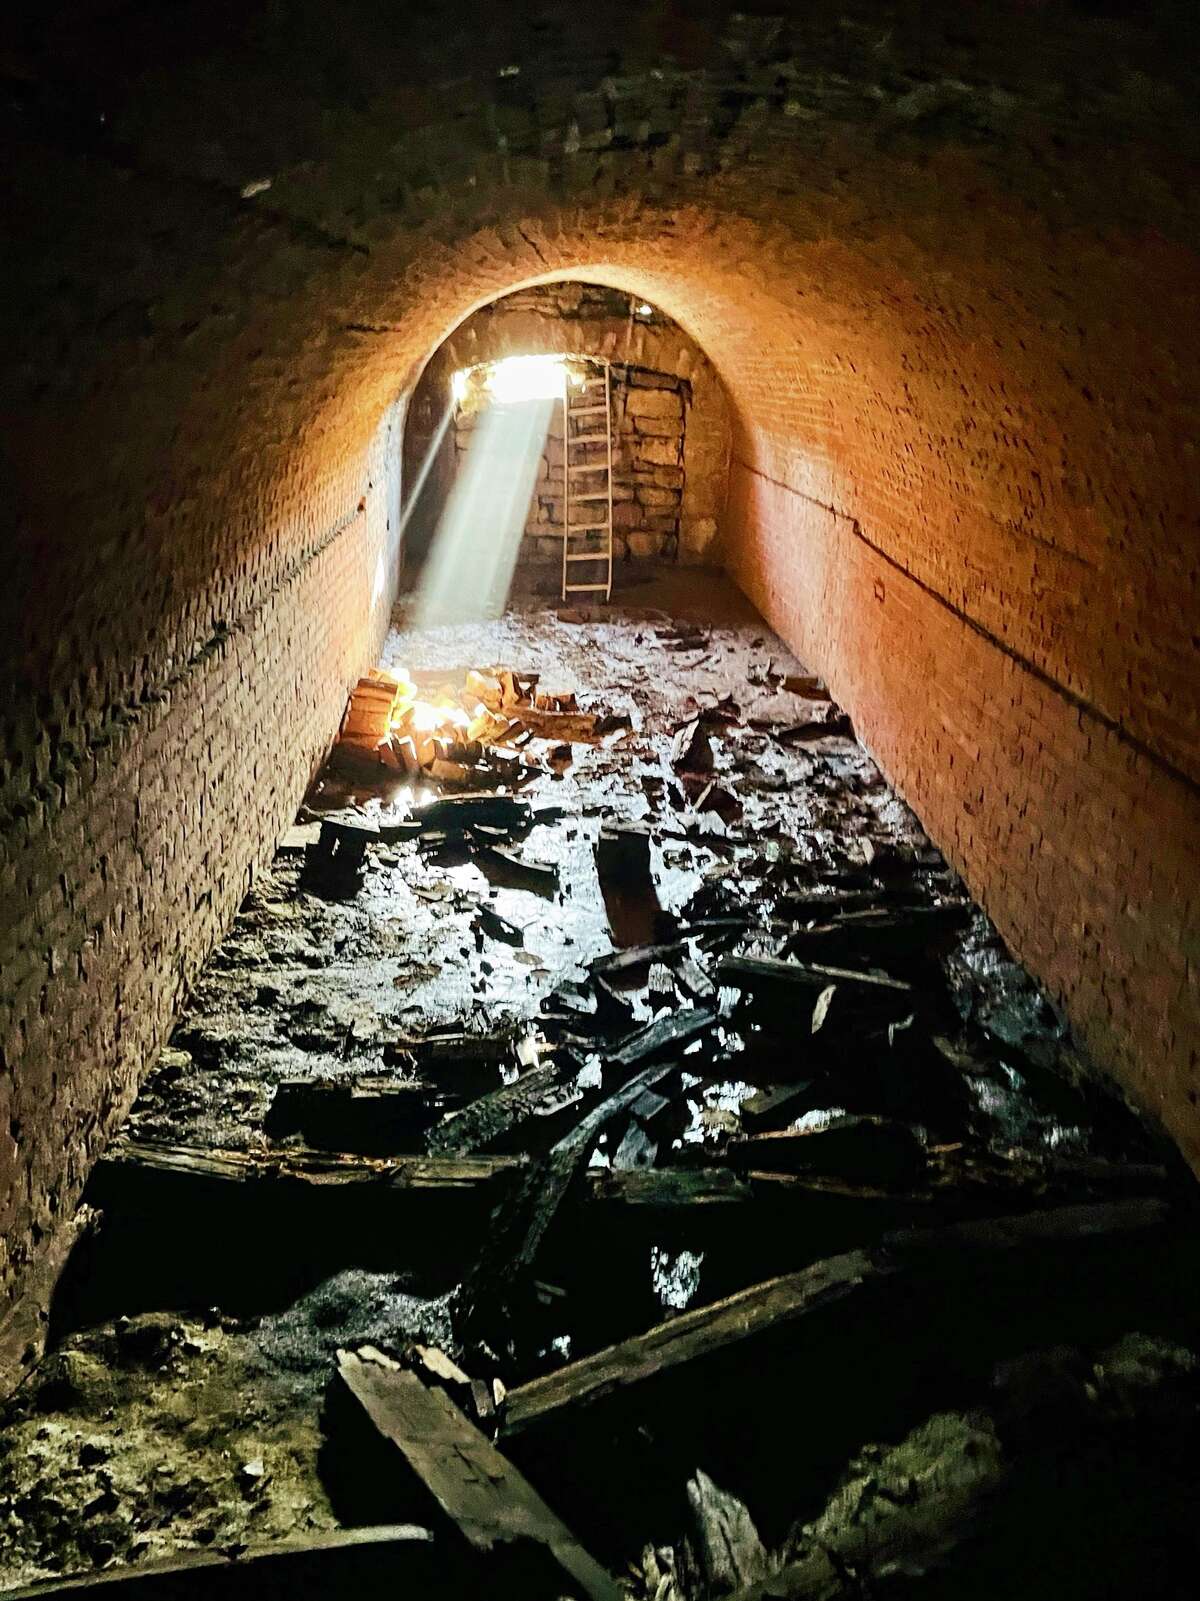 The tunnel entrance was made of limestone and its structure is supported by brick. Historians and the homeowners are baffled at the discovery of the tunnel beneath the property at 322 Langdon Street.